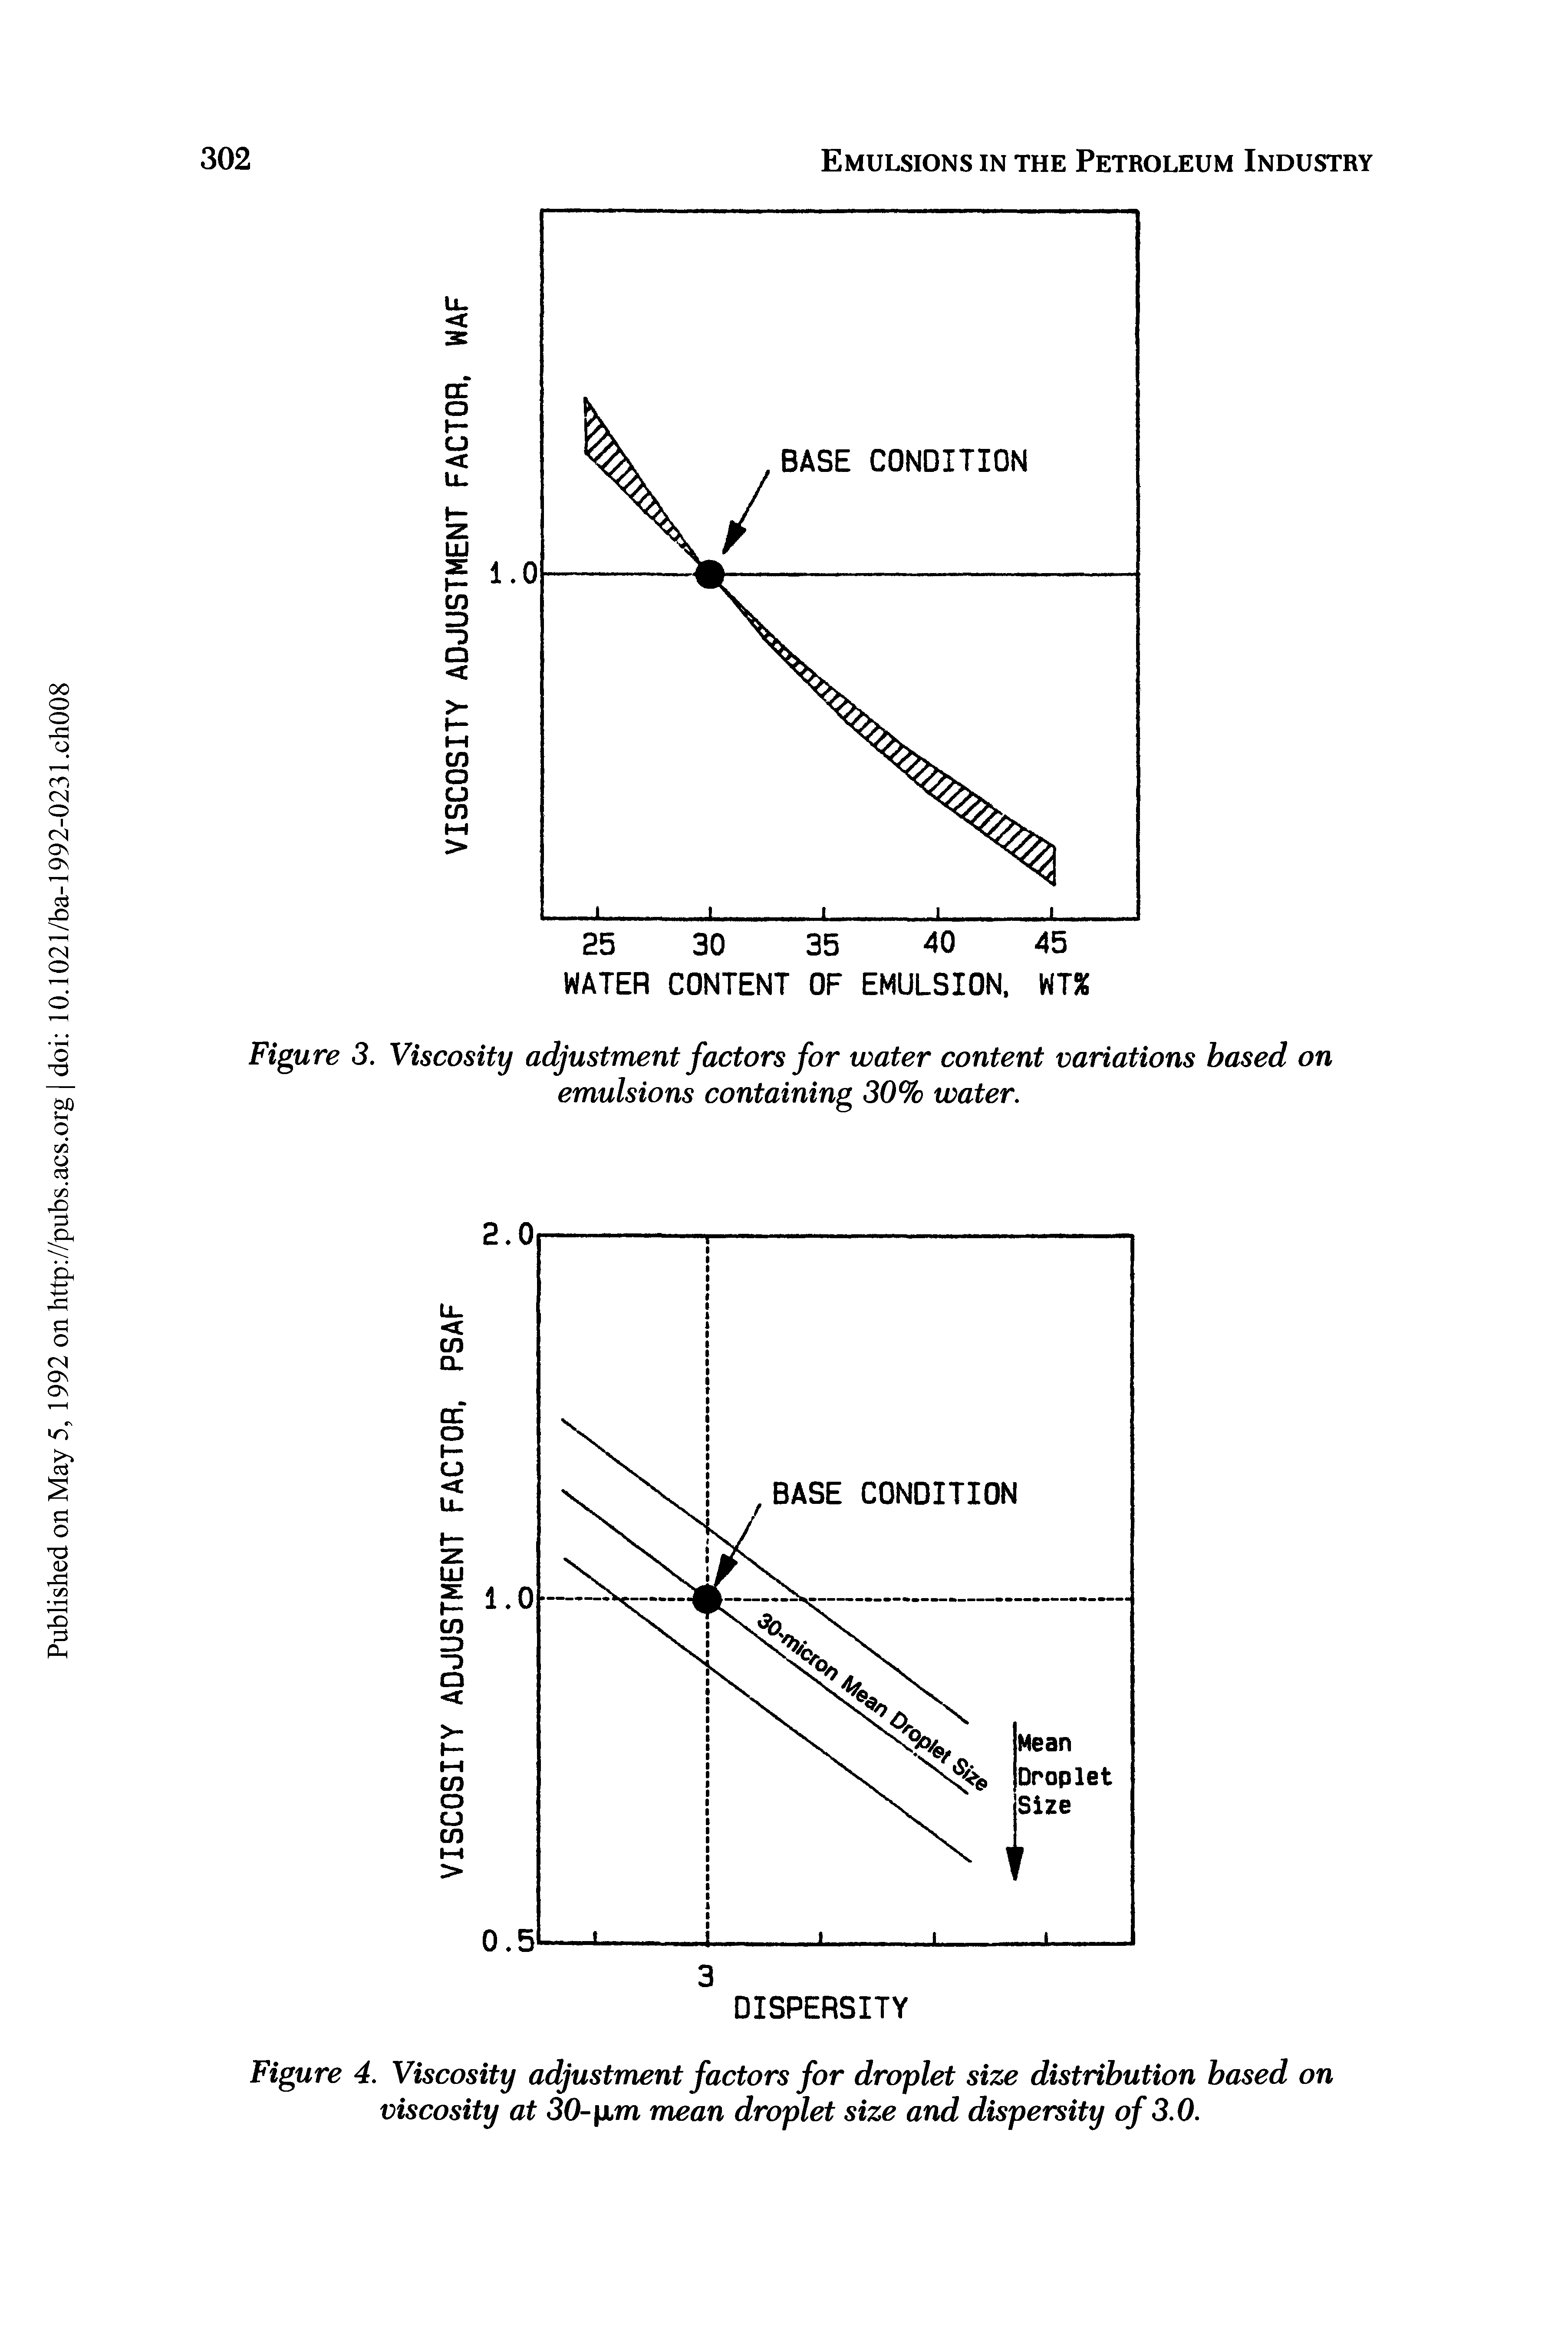 Figure 3. Viscosity adjustment factors for water content variations based on emulsions containing 30% water.